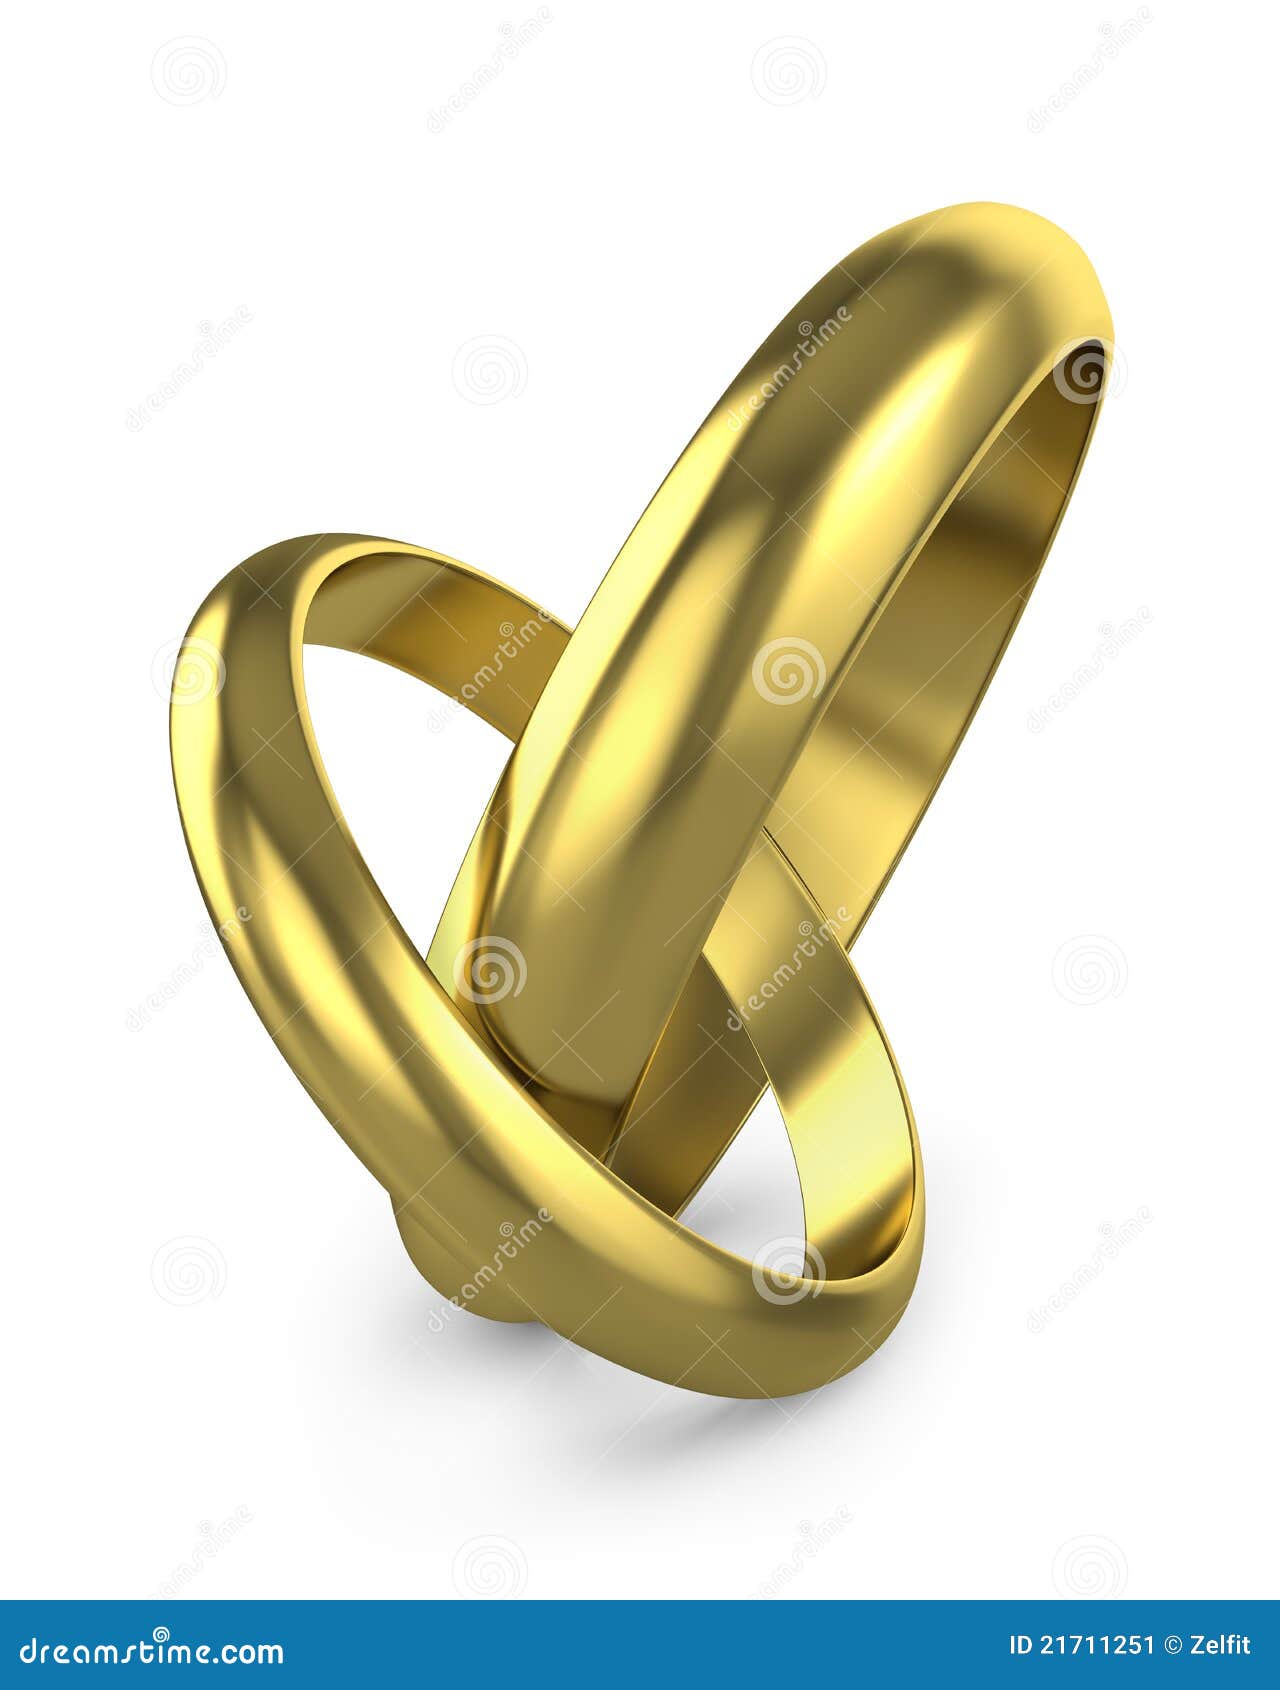 Pair of connected wedding rings on white background.